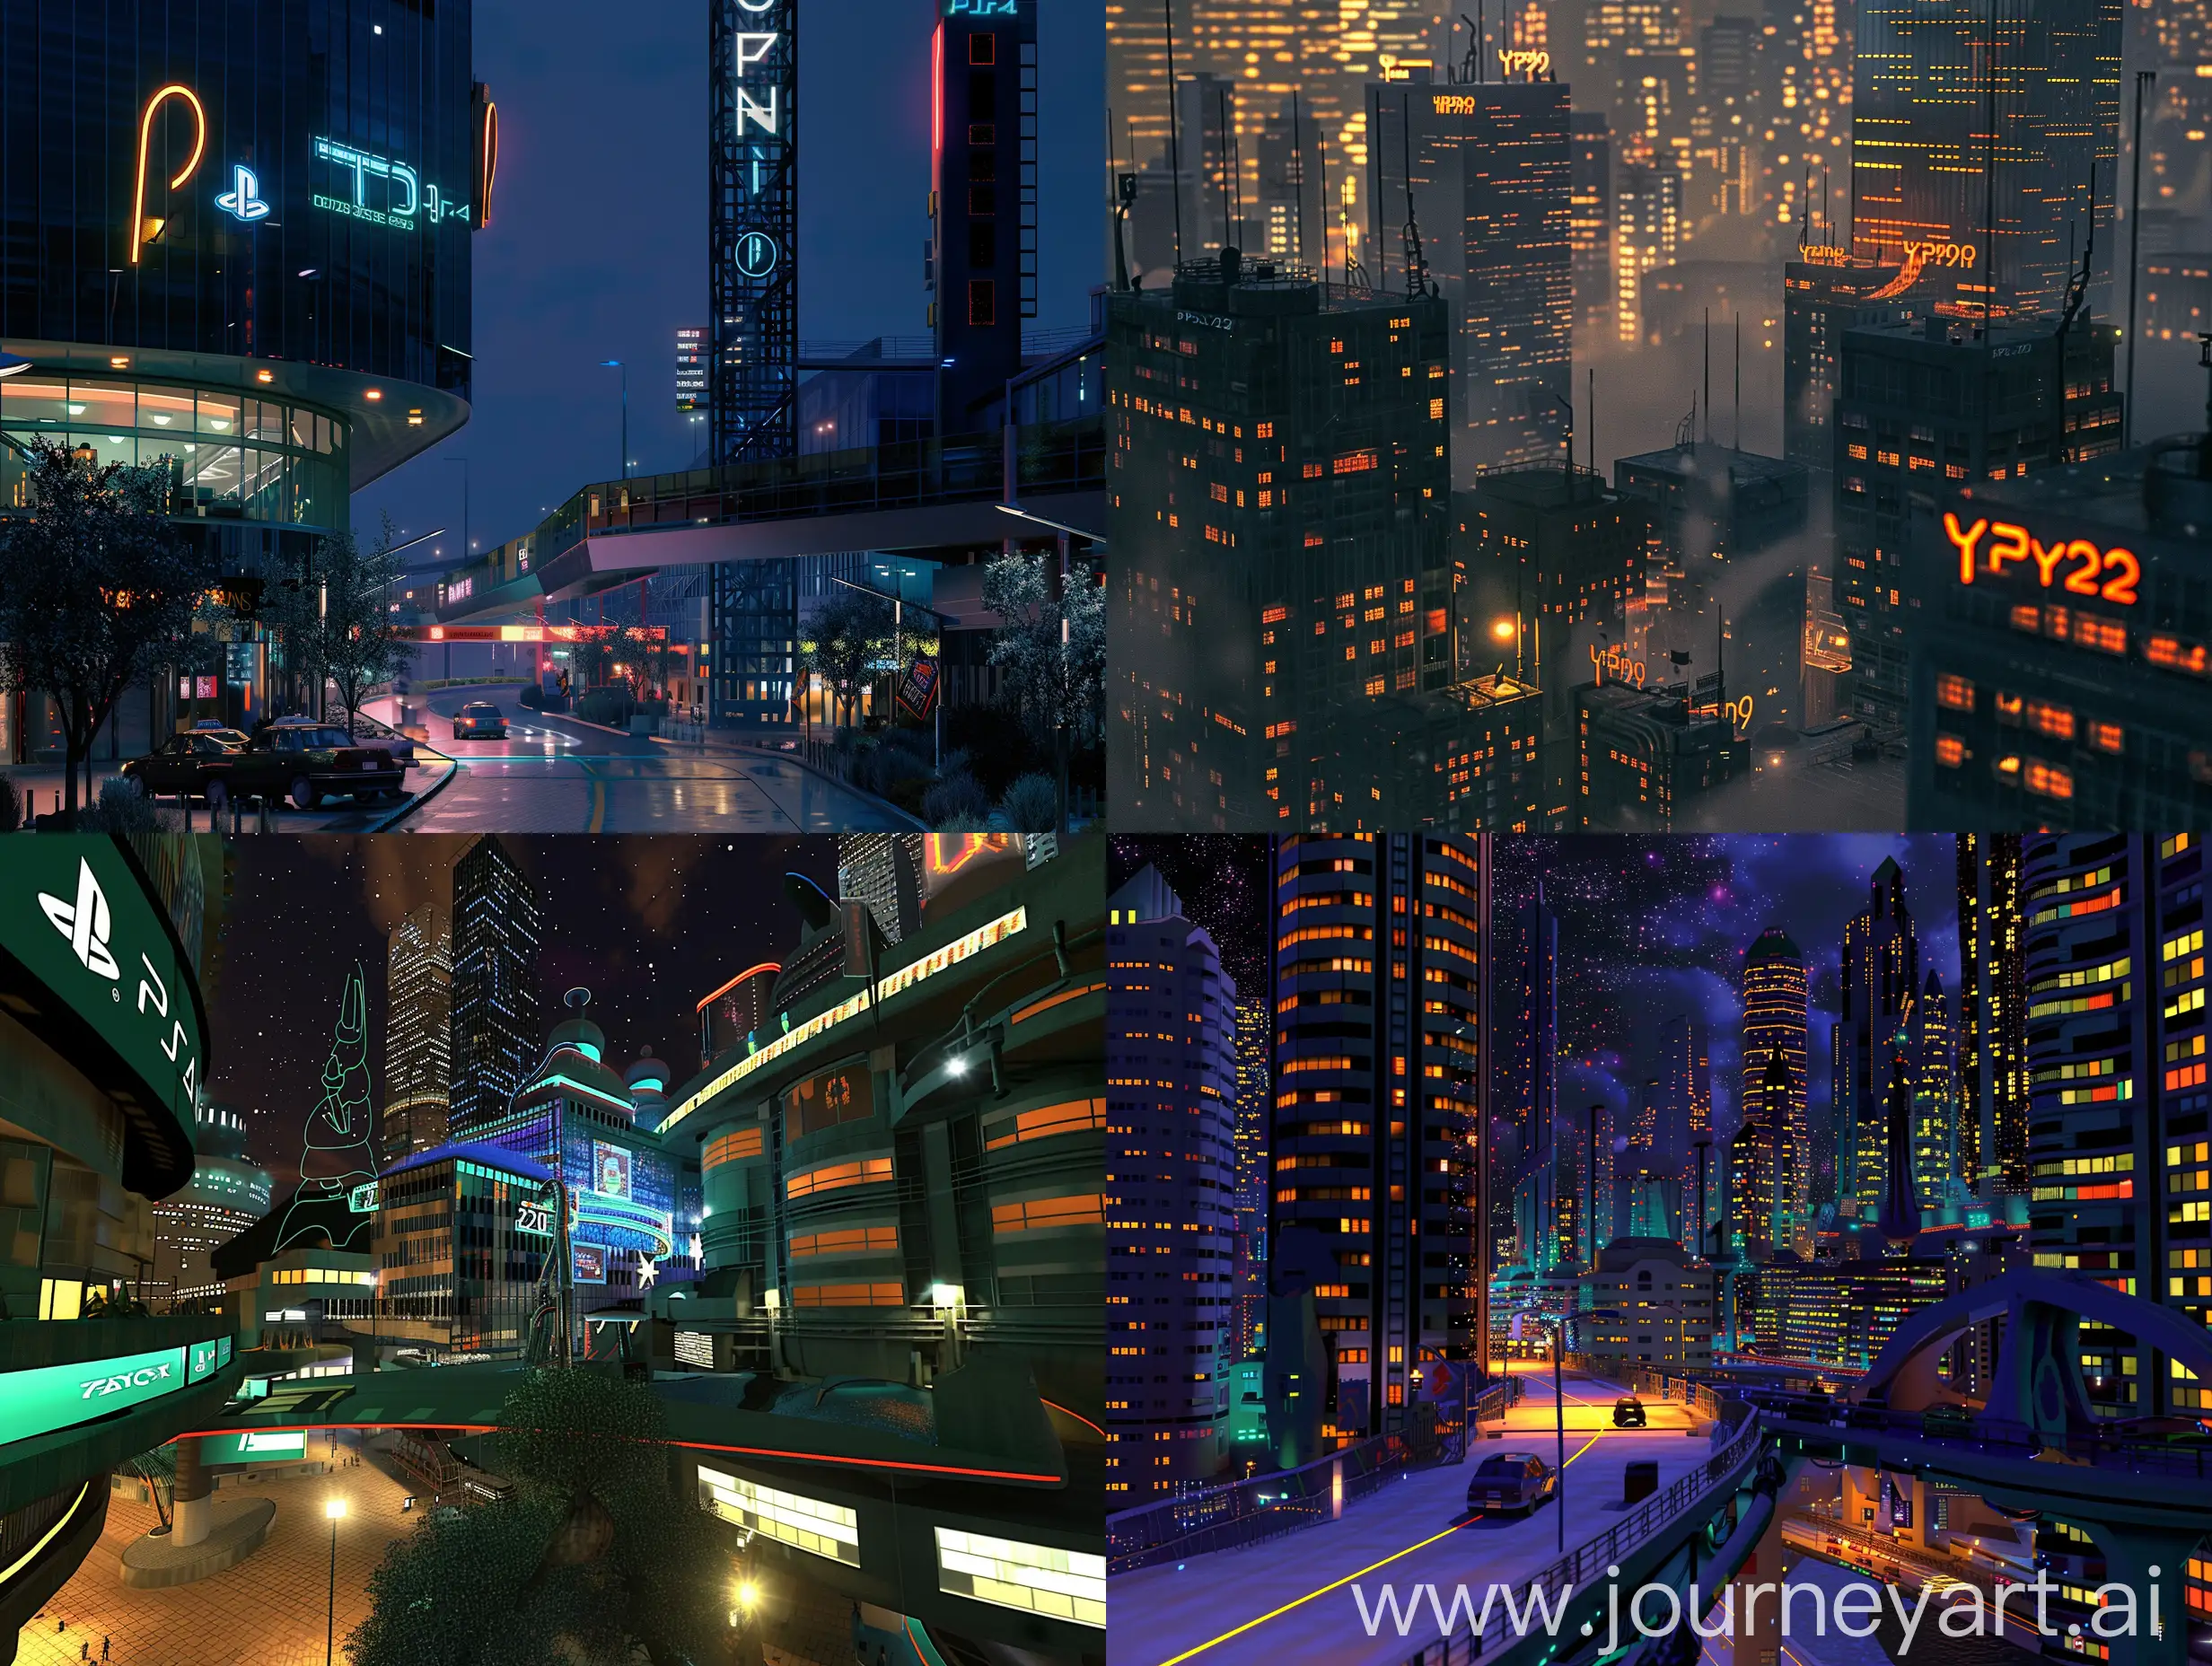 Futuristic-Cityscape-Render-in-Retro-PlayStation-2-Style-at-Night